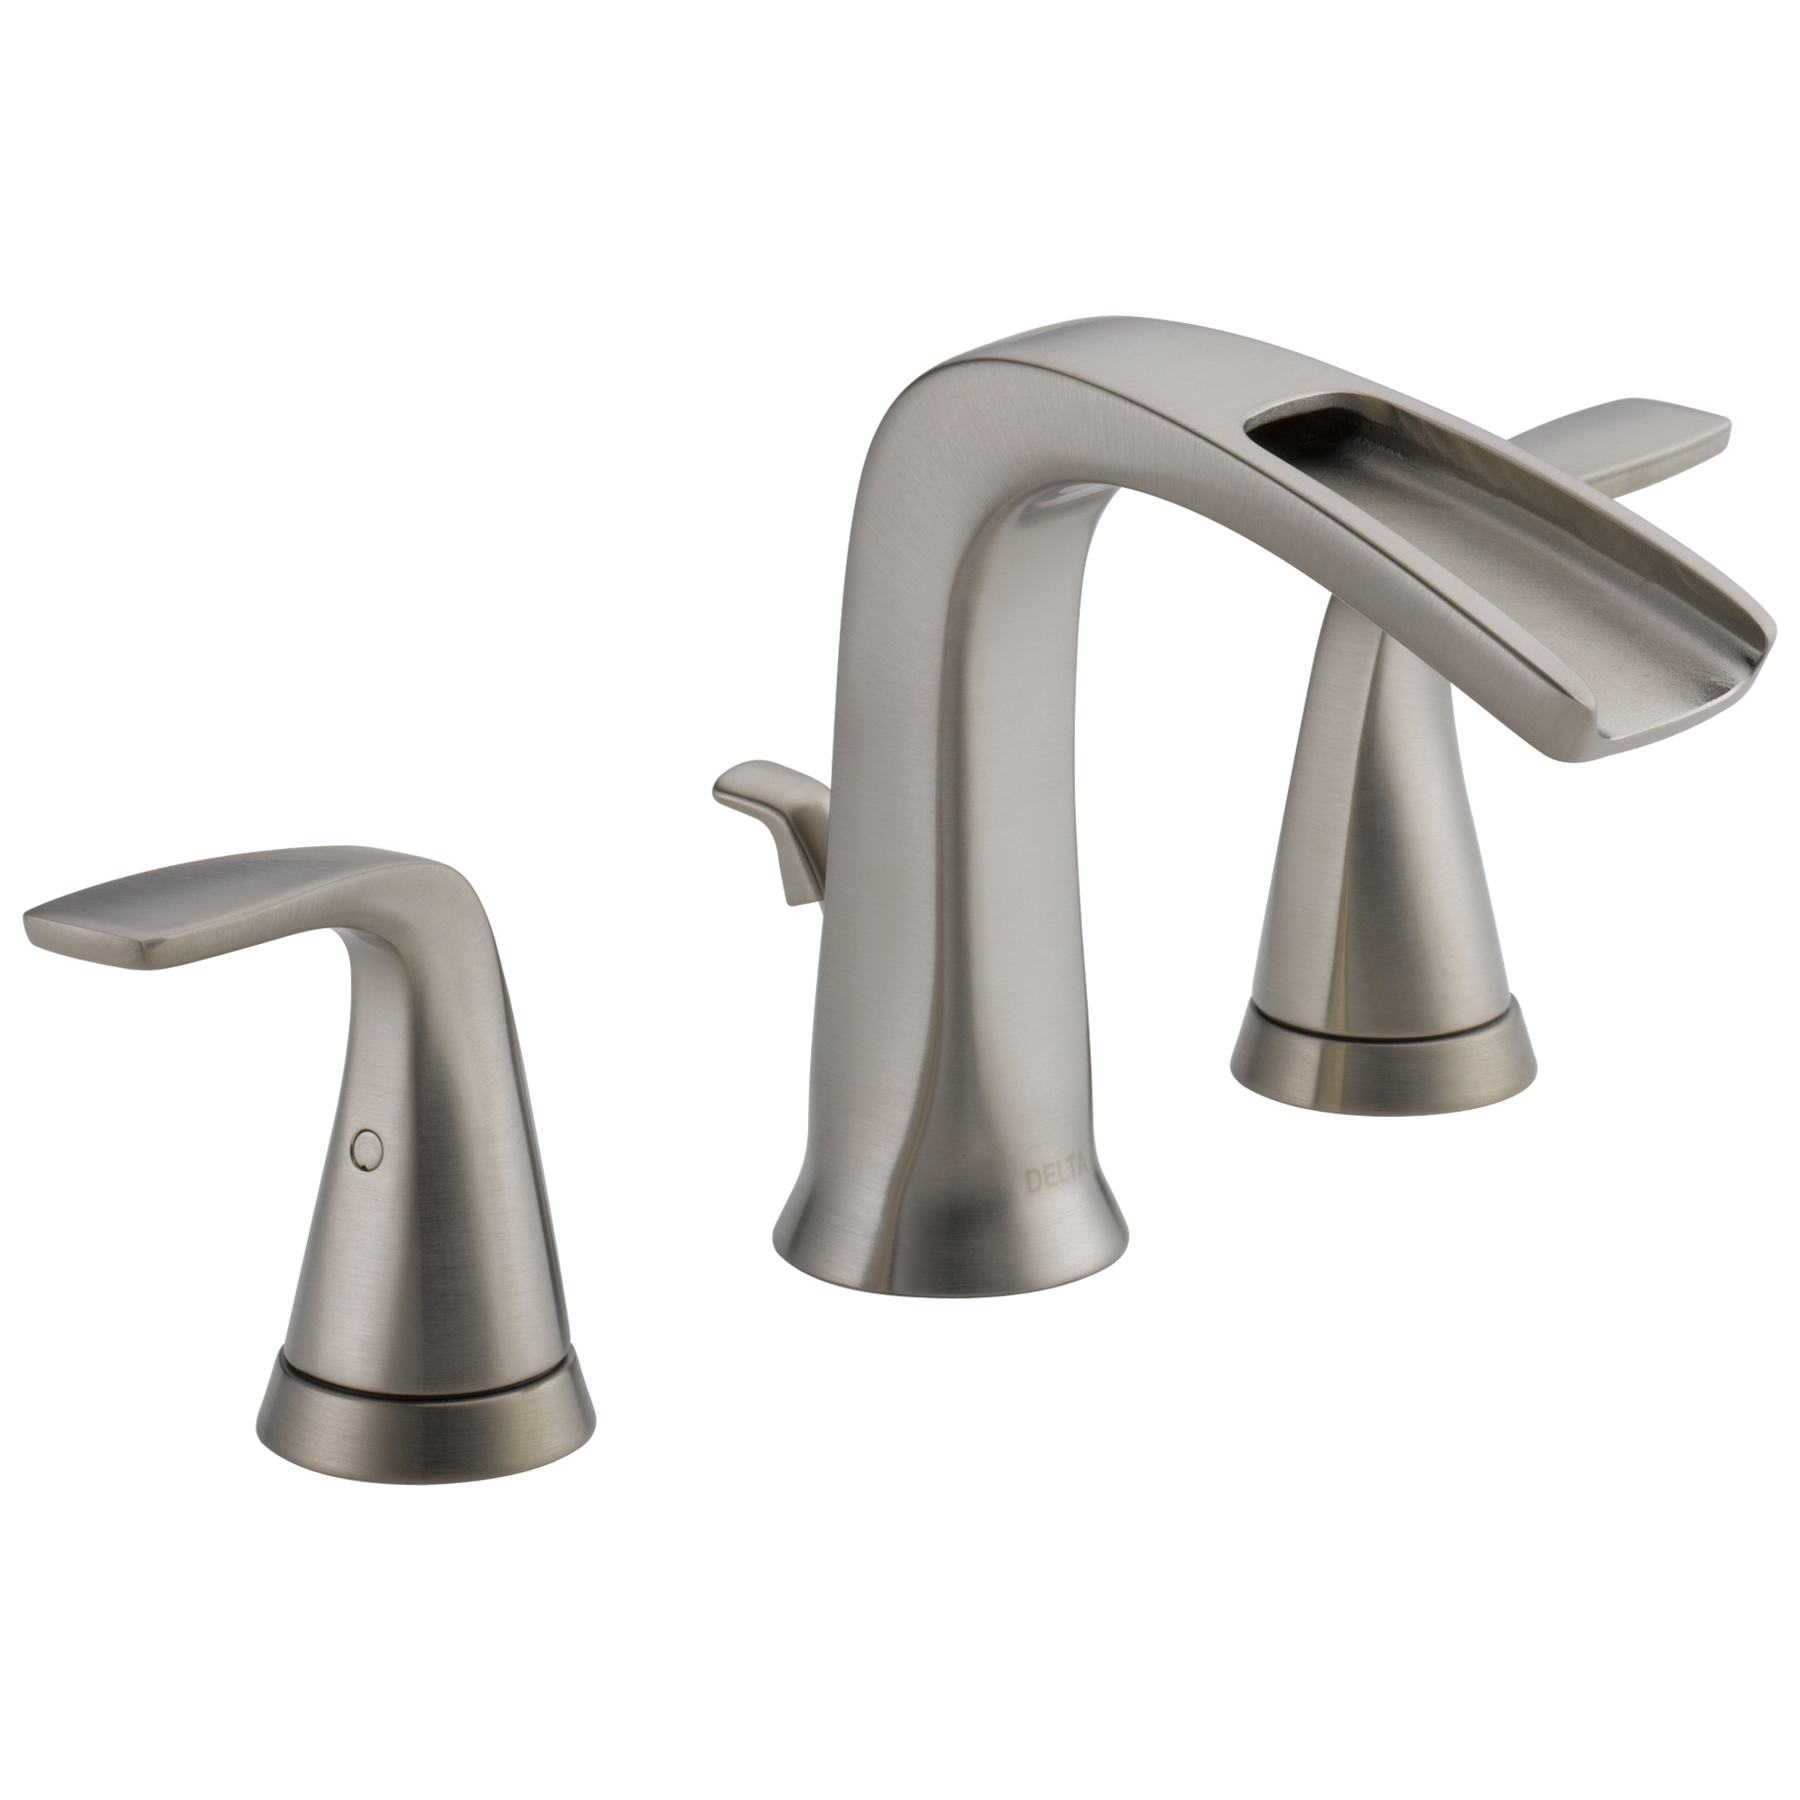 Two Handle Widespread Bathroom Faucet in Stainless